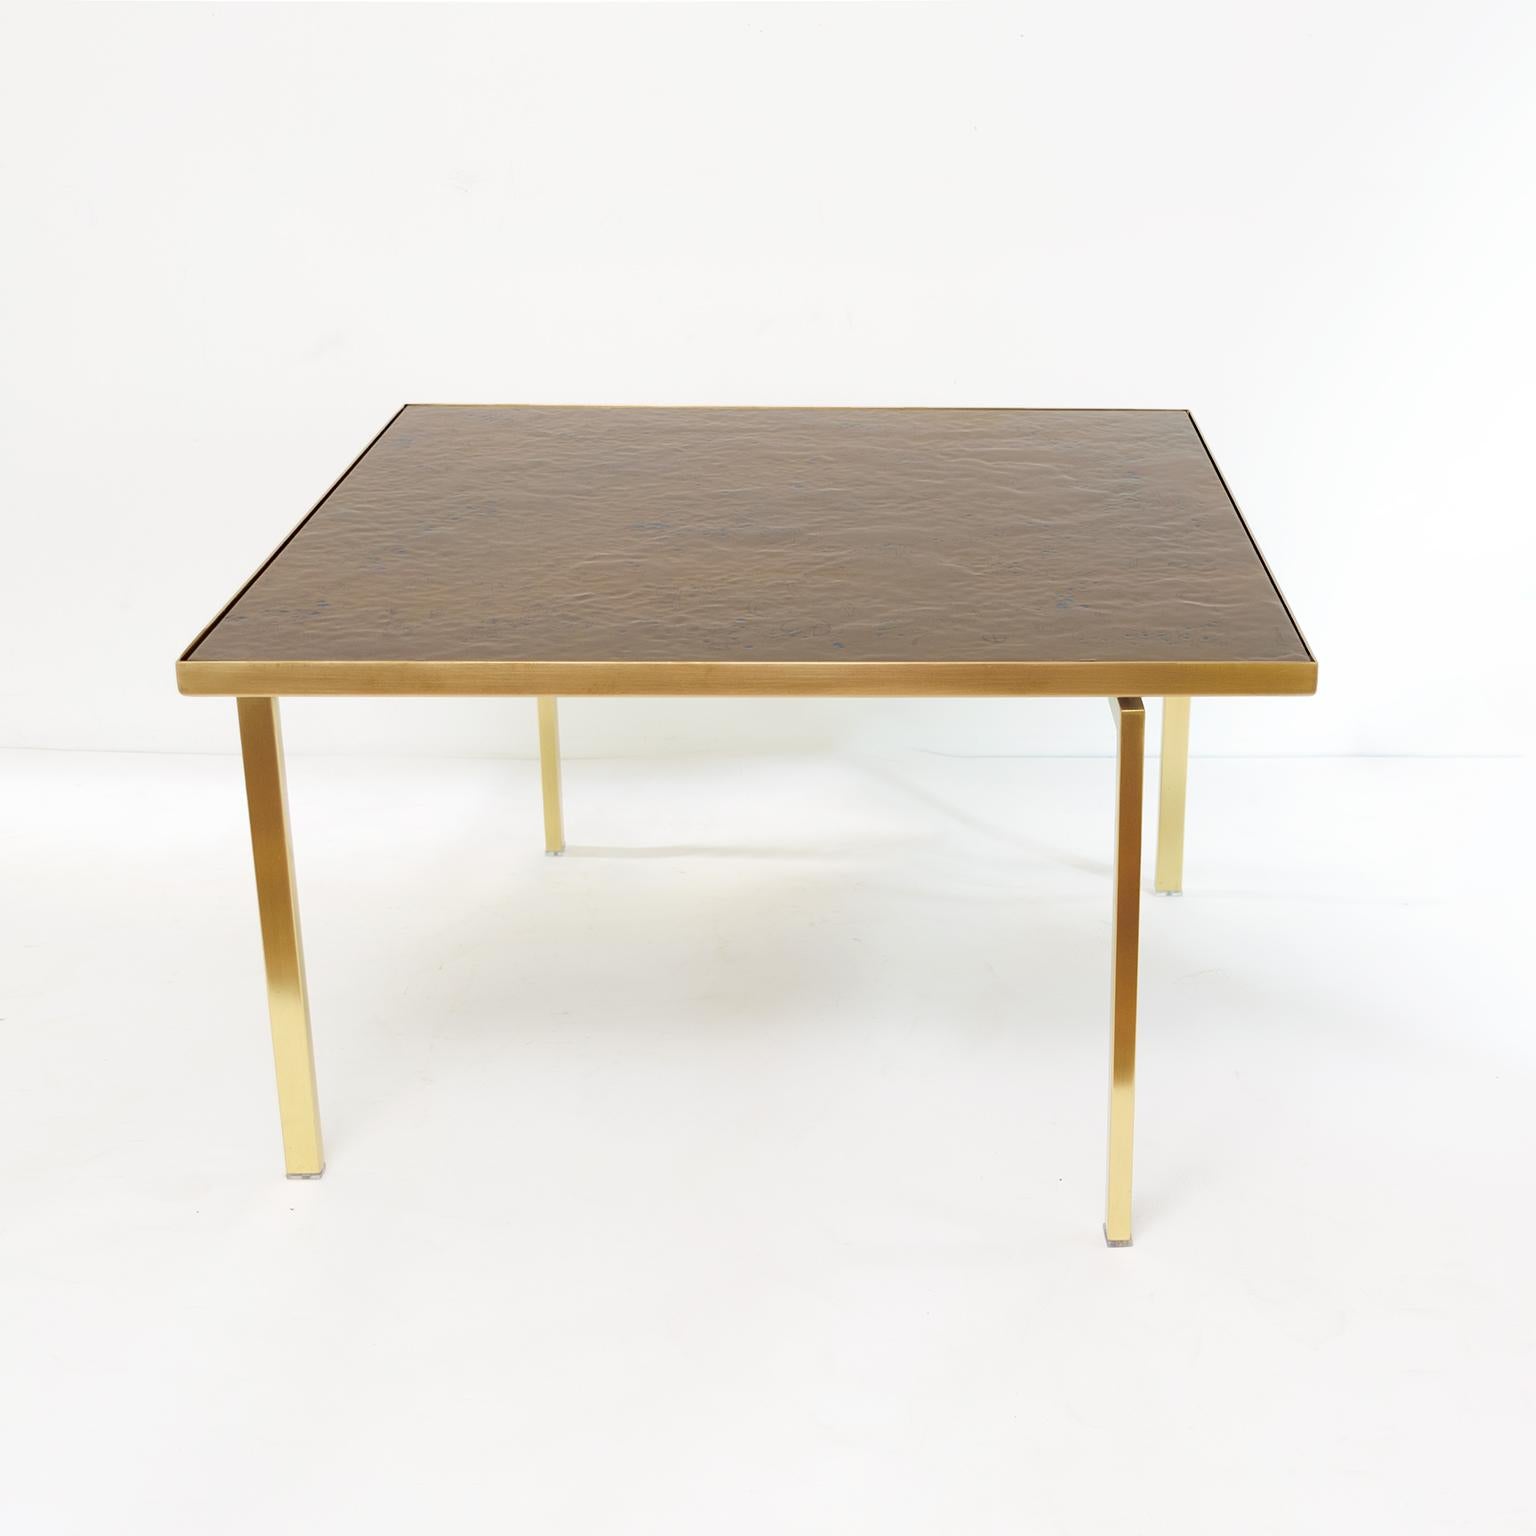 Carl Bjørn and P. Törneman enameled Triva coffee table produced by NK (Nordiska Kopaniet), Stockholm circa 1950’s. The all brass frame has been newly polished and lacquered. The surface is enamel on copper and depicts the Bronze Age stone carvings